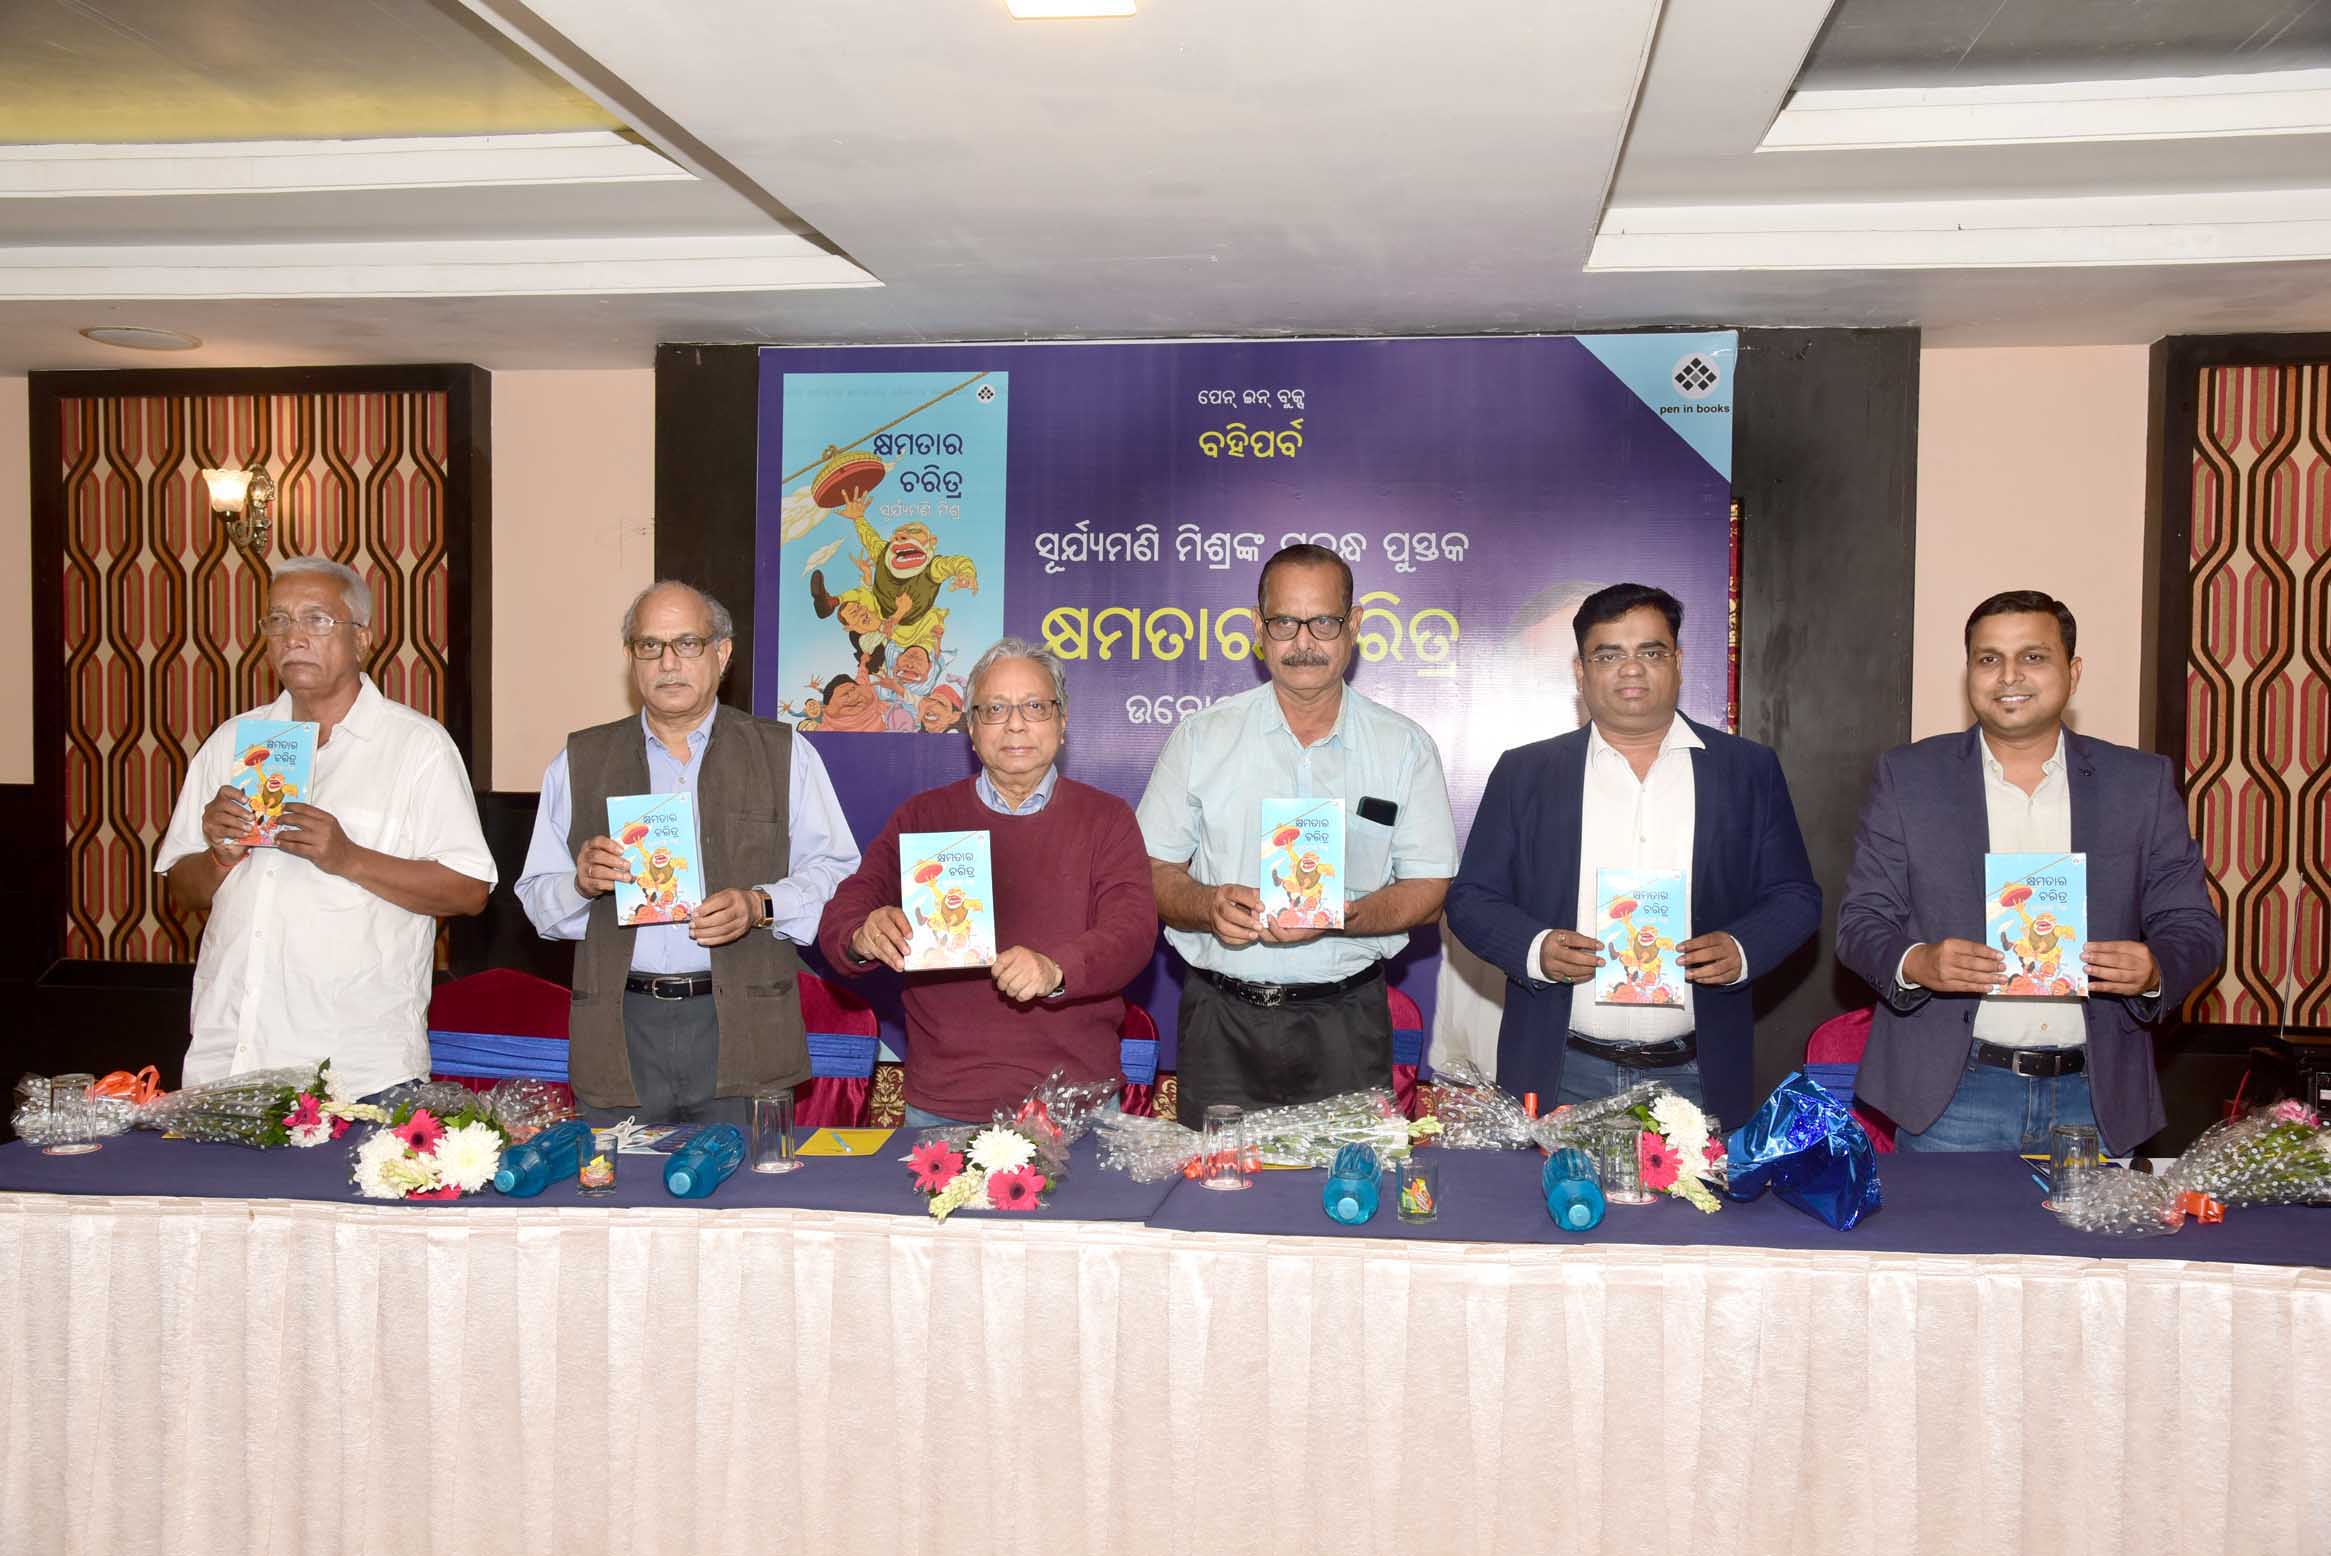 Kshyamatara Charitra written by Suryamani Mishra and published by PEN IN BOOKS released